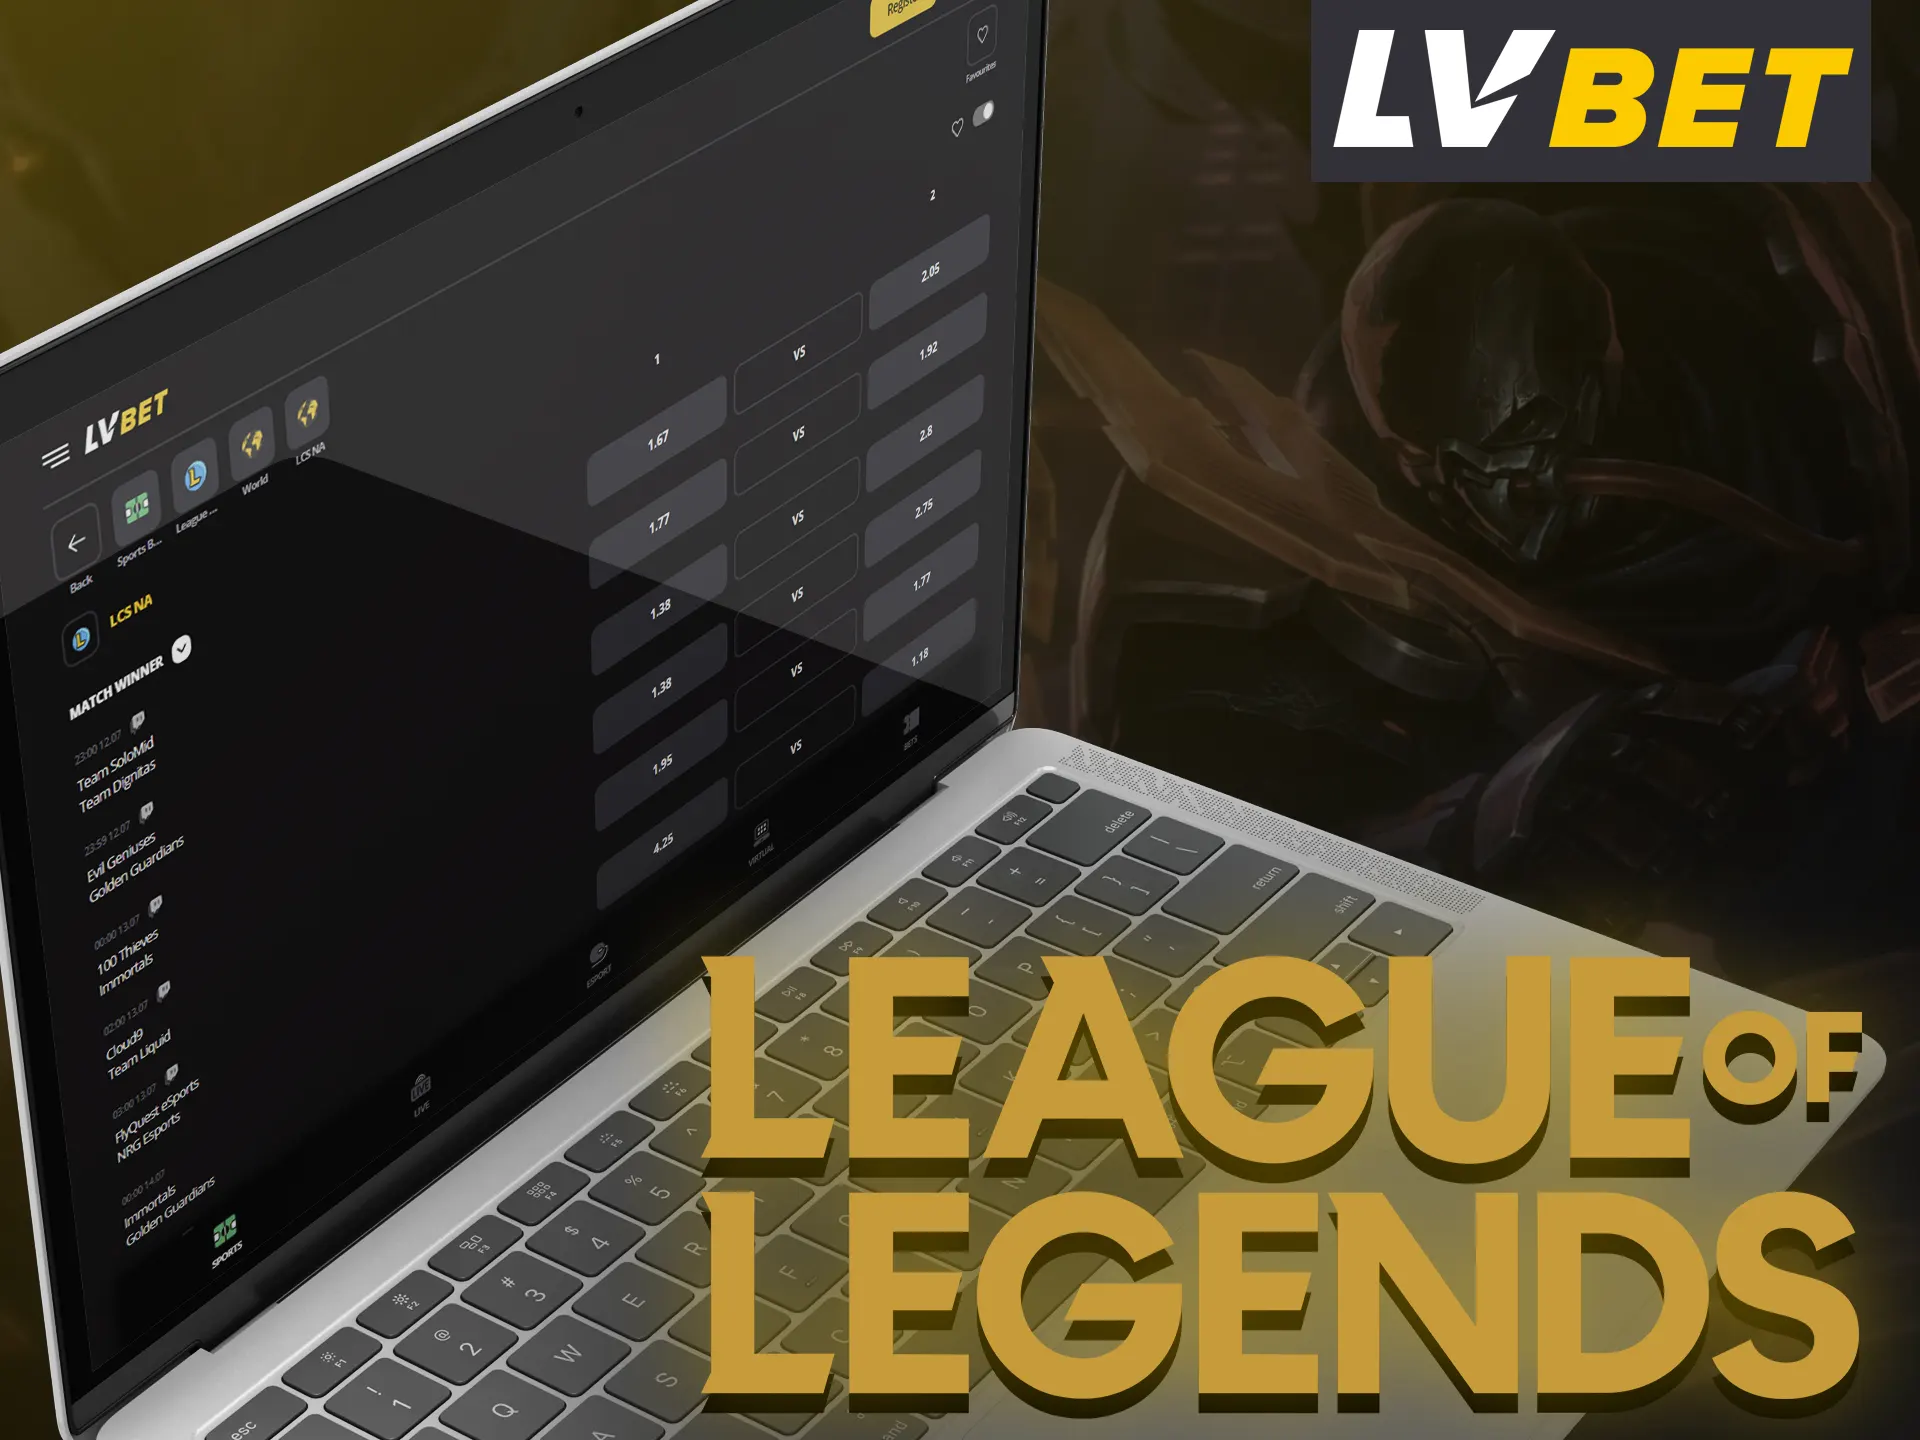 Place your bet on the League of Legends tournament at LV Bet.